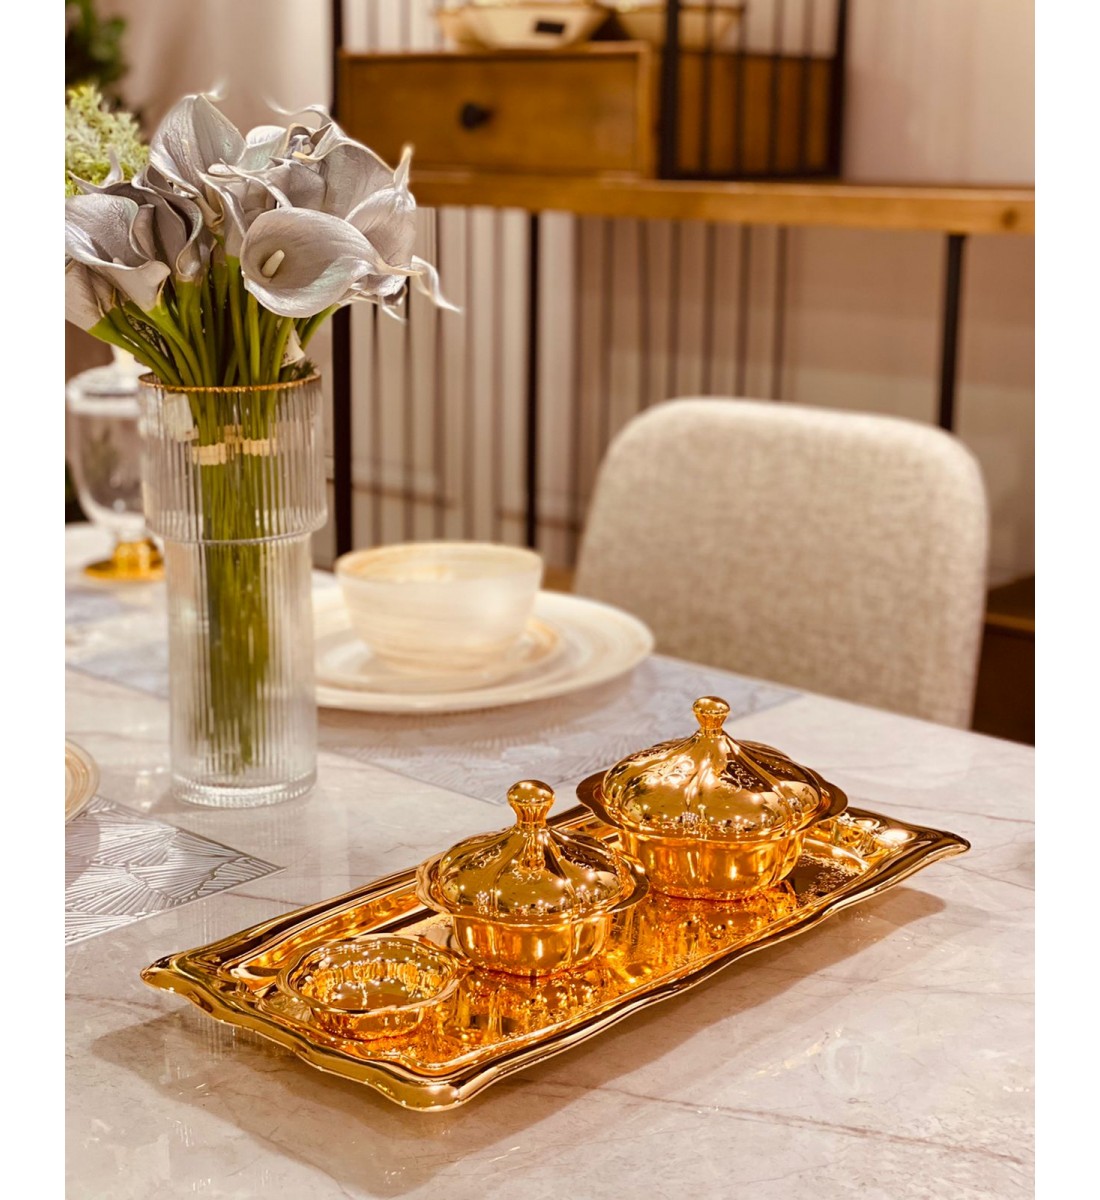 Toufia set to serve with dates rectangular gold / silver color